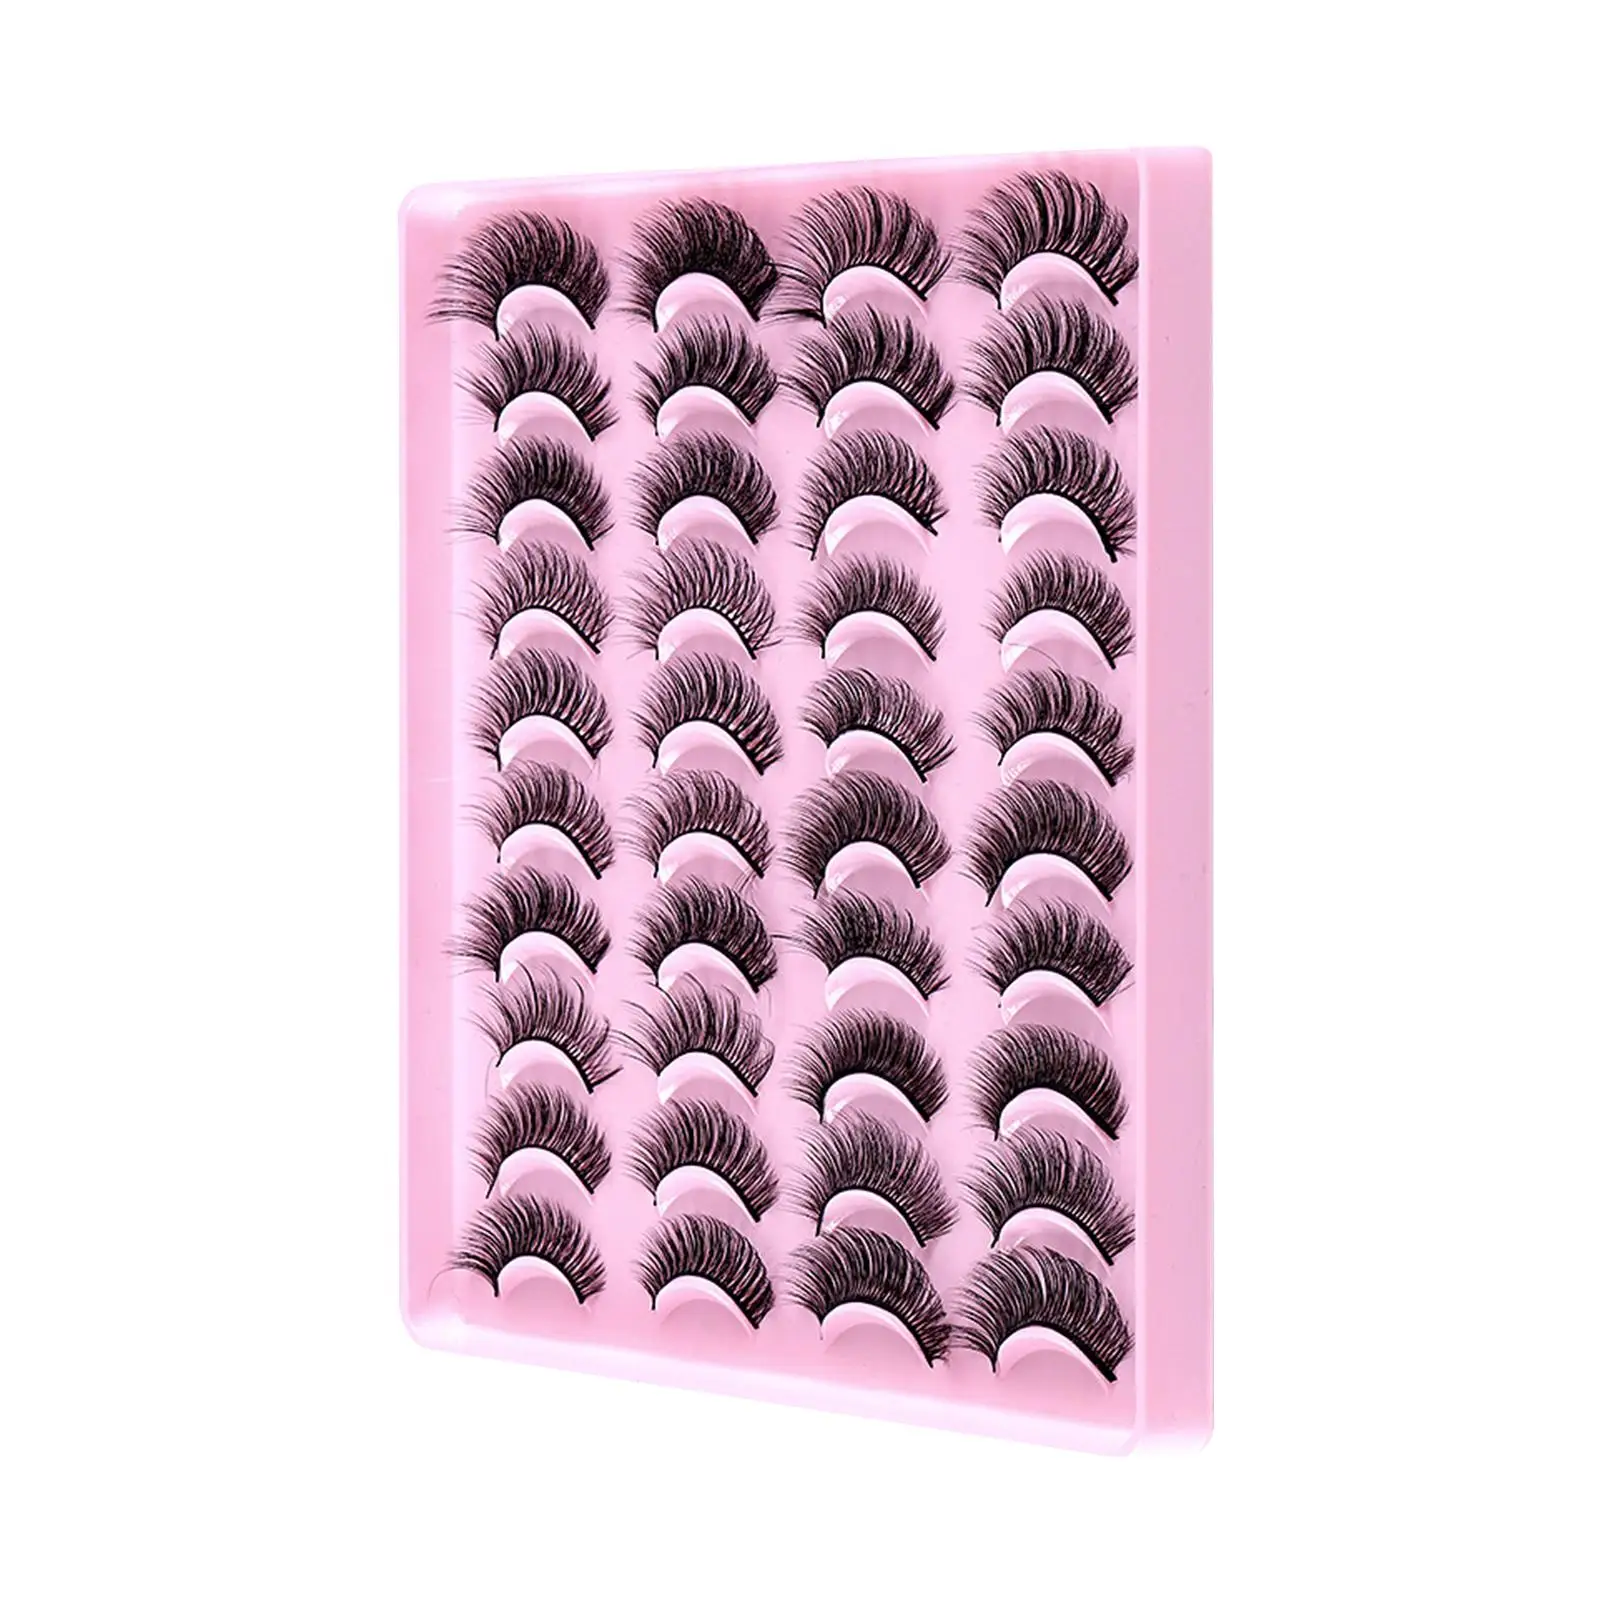 False Eyelashes Makeup Tools Wispy 5D Volume Handmade Faux Eyelashes Halloween Lashes for Party Valentines Woman Cosplay Stage